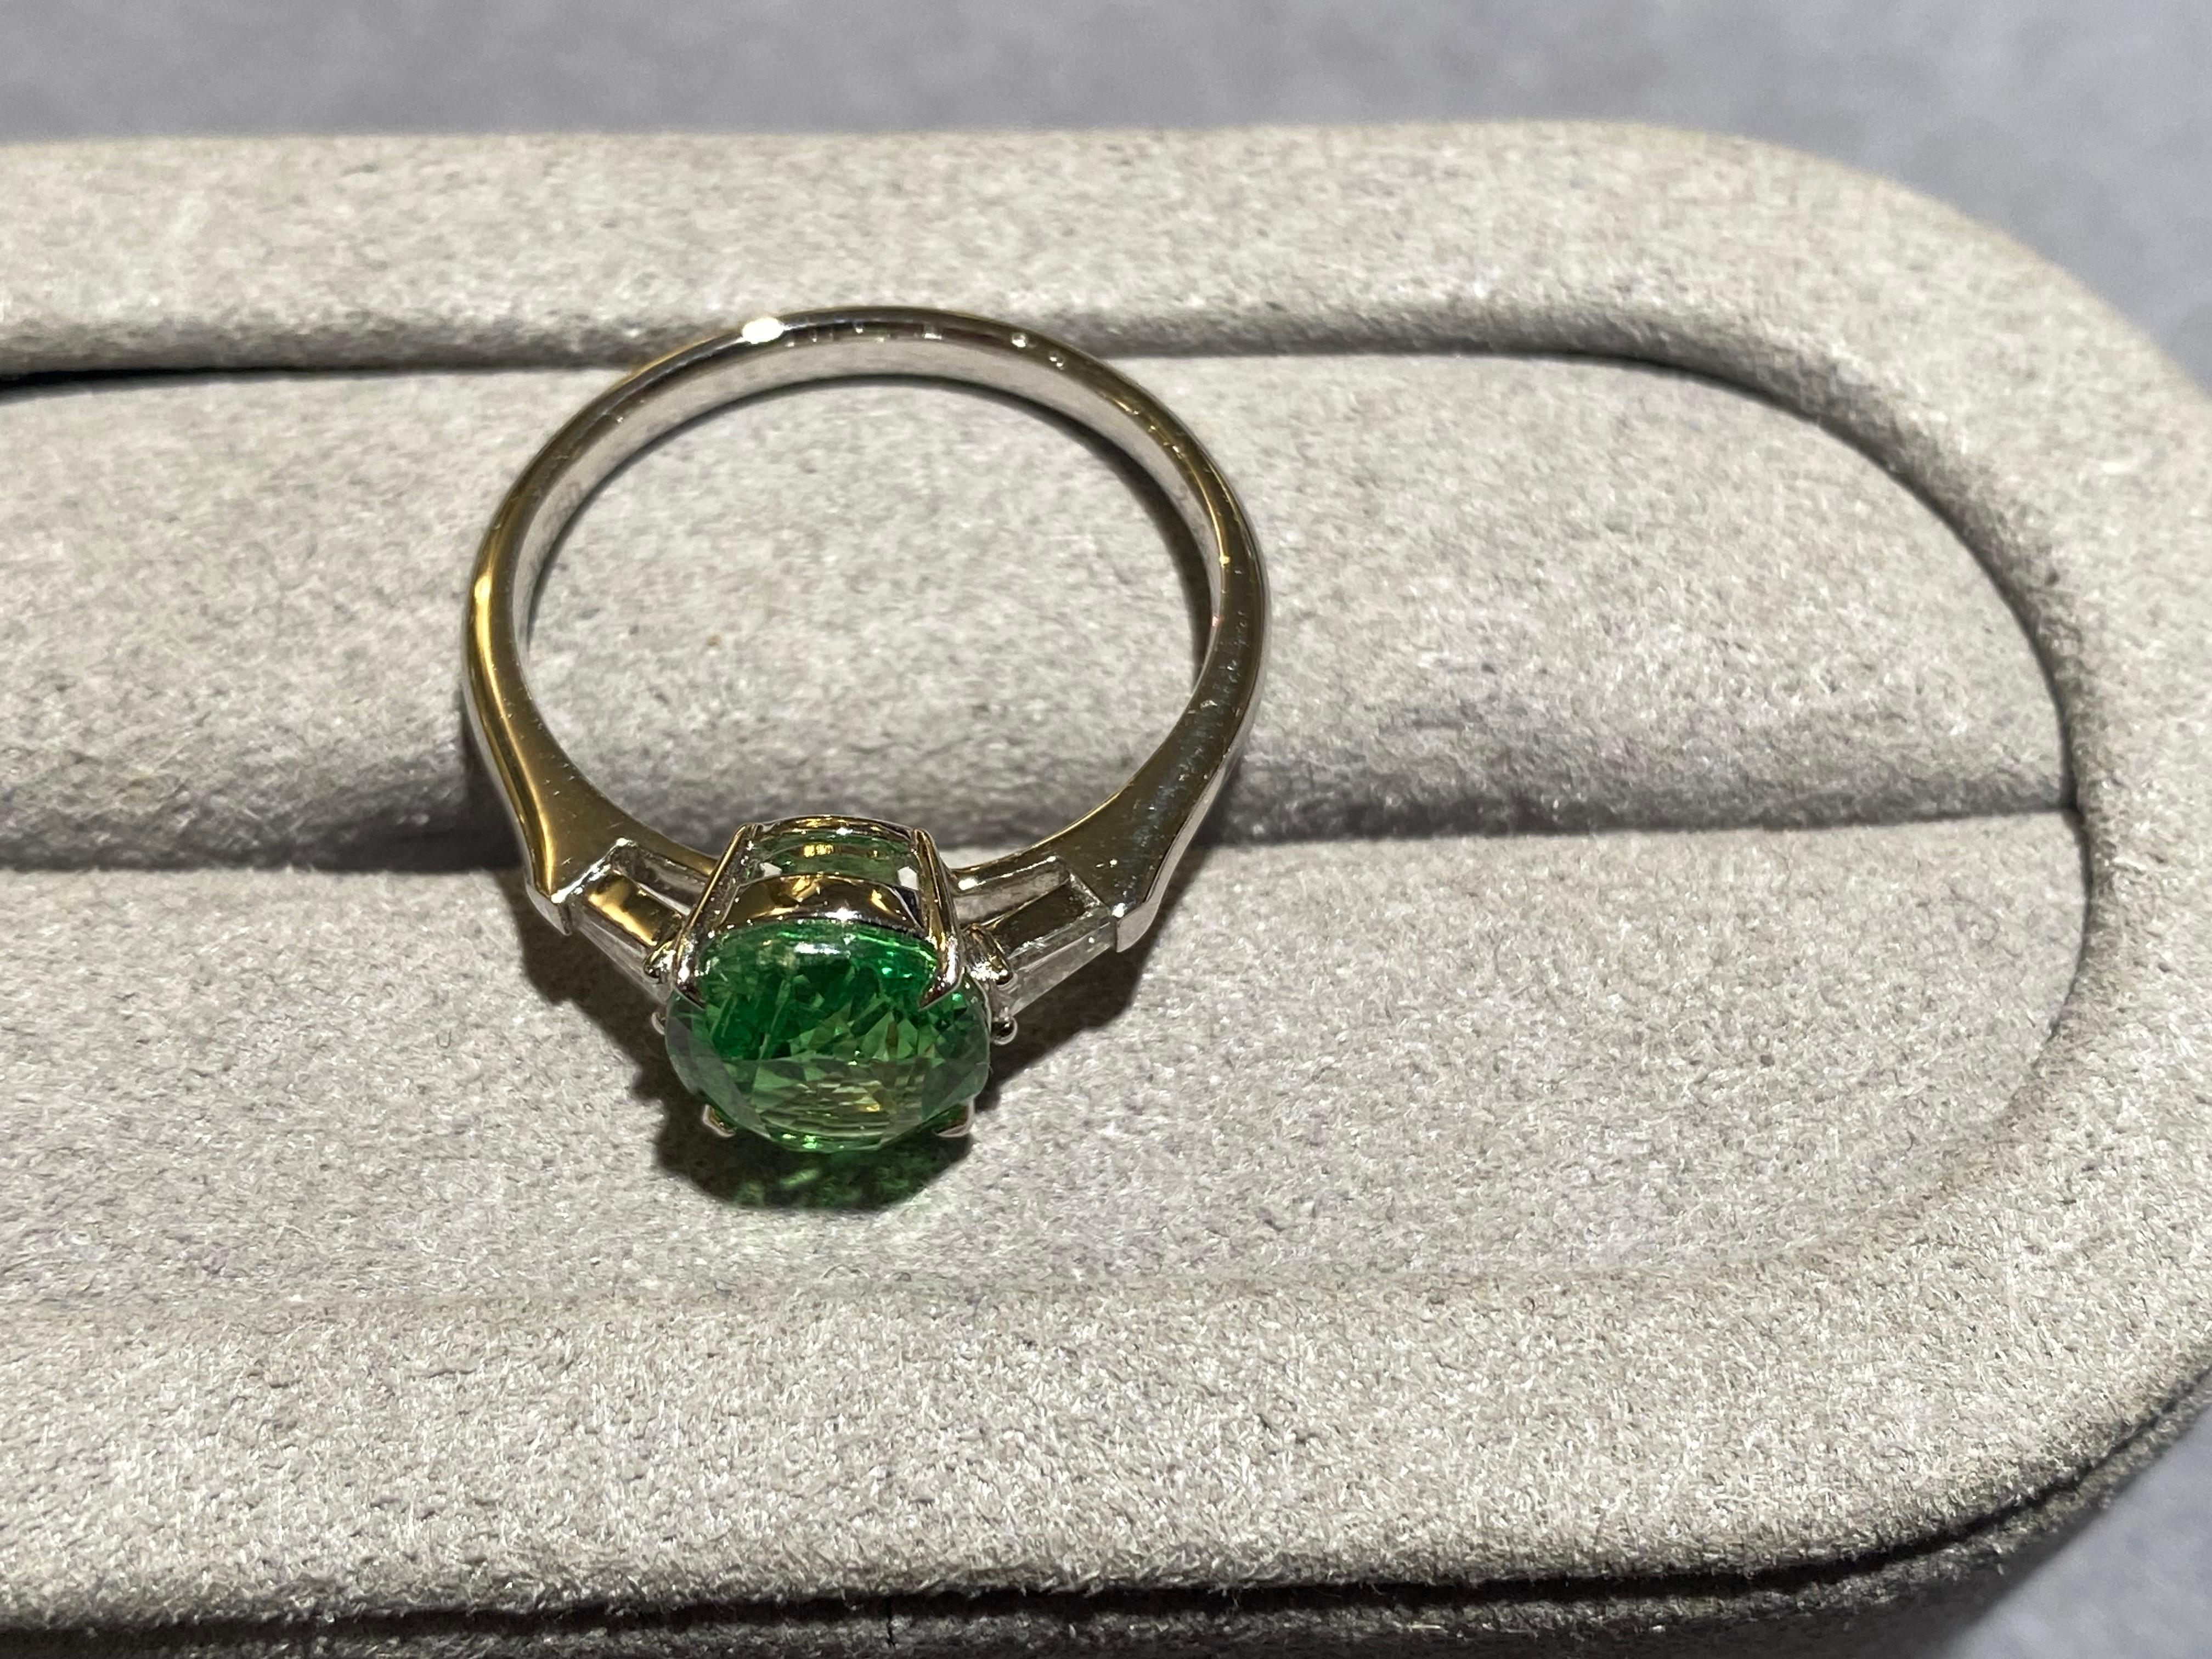 A Tsavorite and diamond three-stone ring in 18k white gold. The main tsavorite is accompanied by 2 tapered baguette diamonds. The Tsavorite is round in shape and with pastel green colour. This is a very simple yet elegant design perfect for everyday